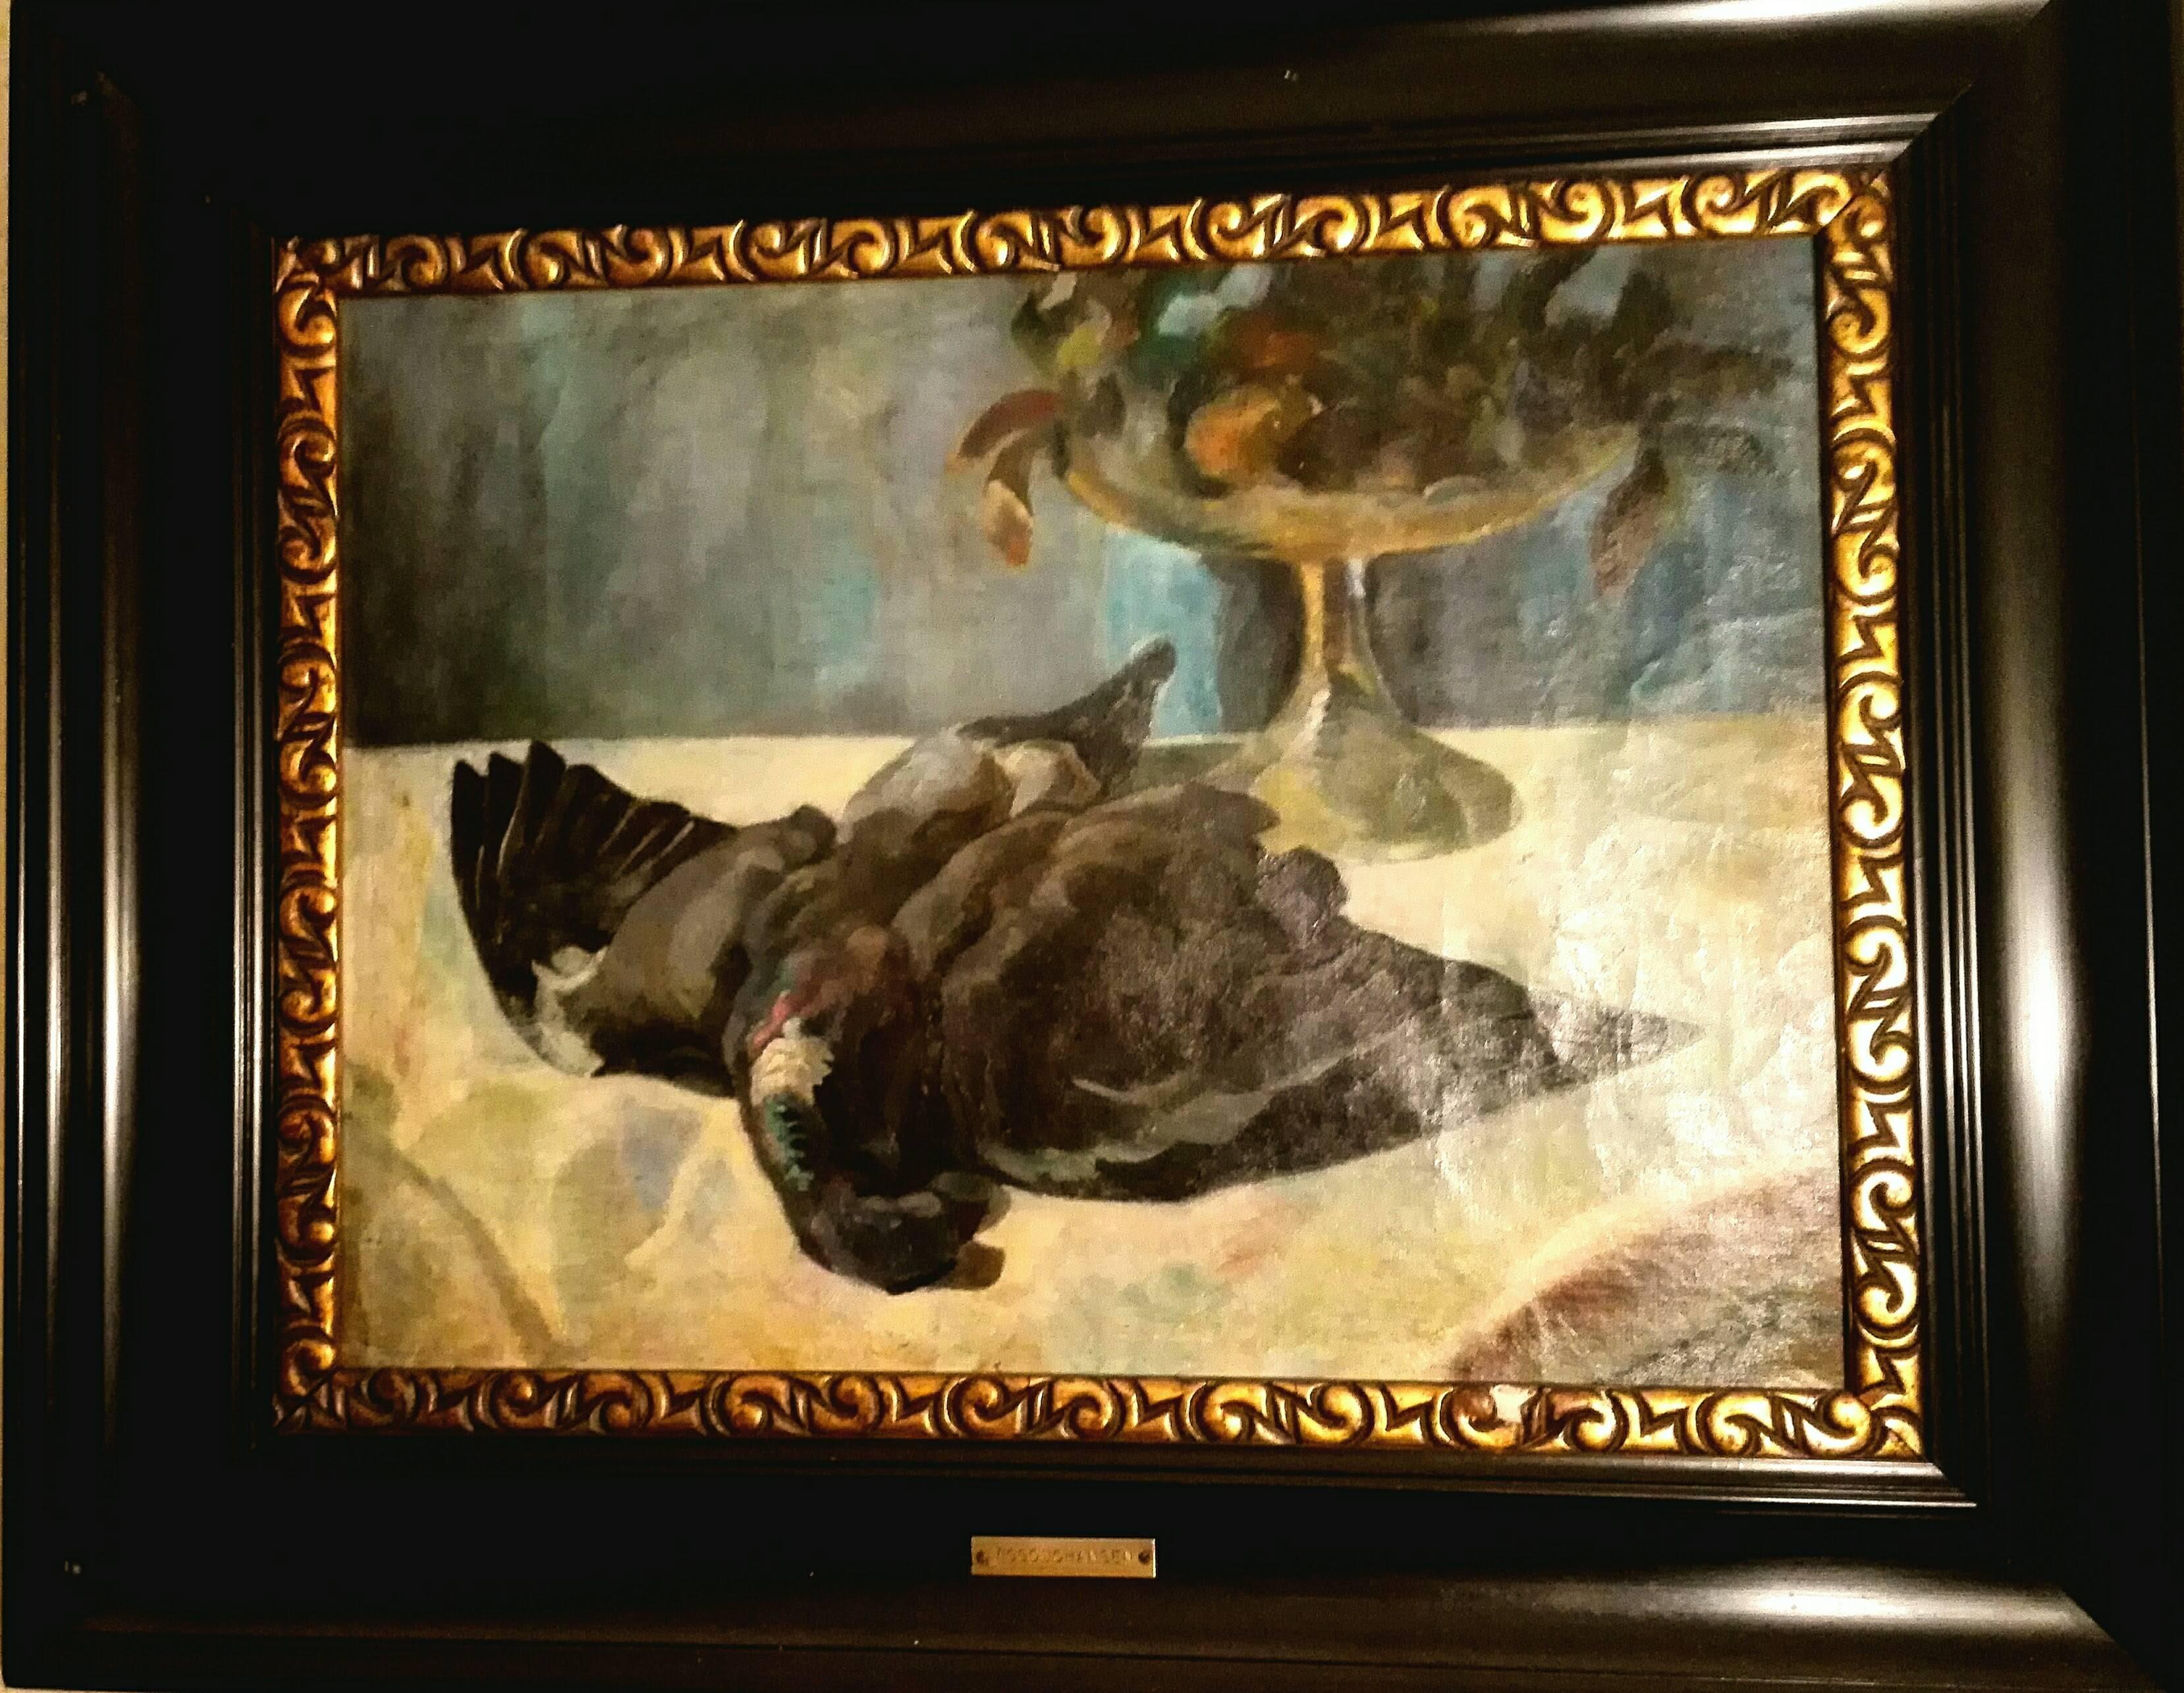 One of the important Skagen painters group in Denmark was Viggo Johanson ! Also after 1885 he exhibited in Paris and there he was inspired from Claude Monet! All in all
this hunting still life with the original ebonised wood frame, is an imposing